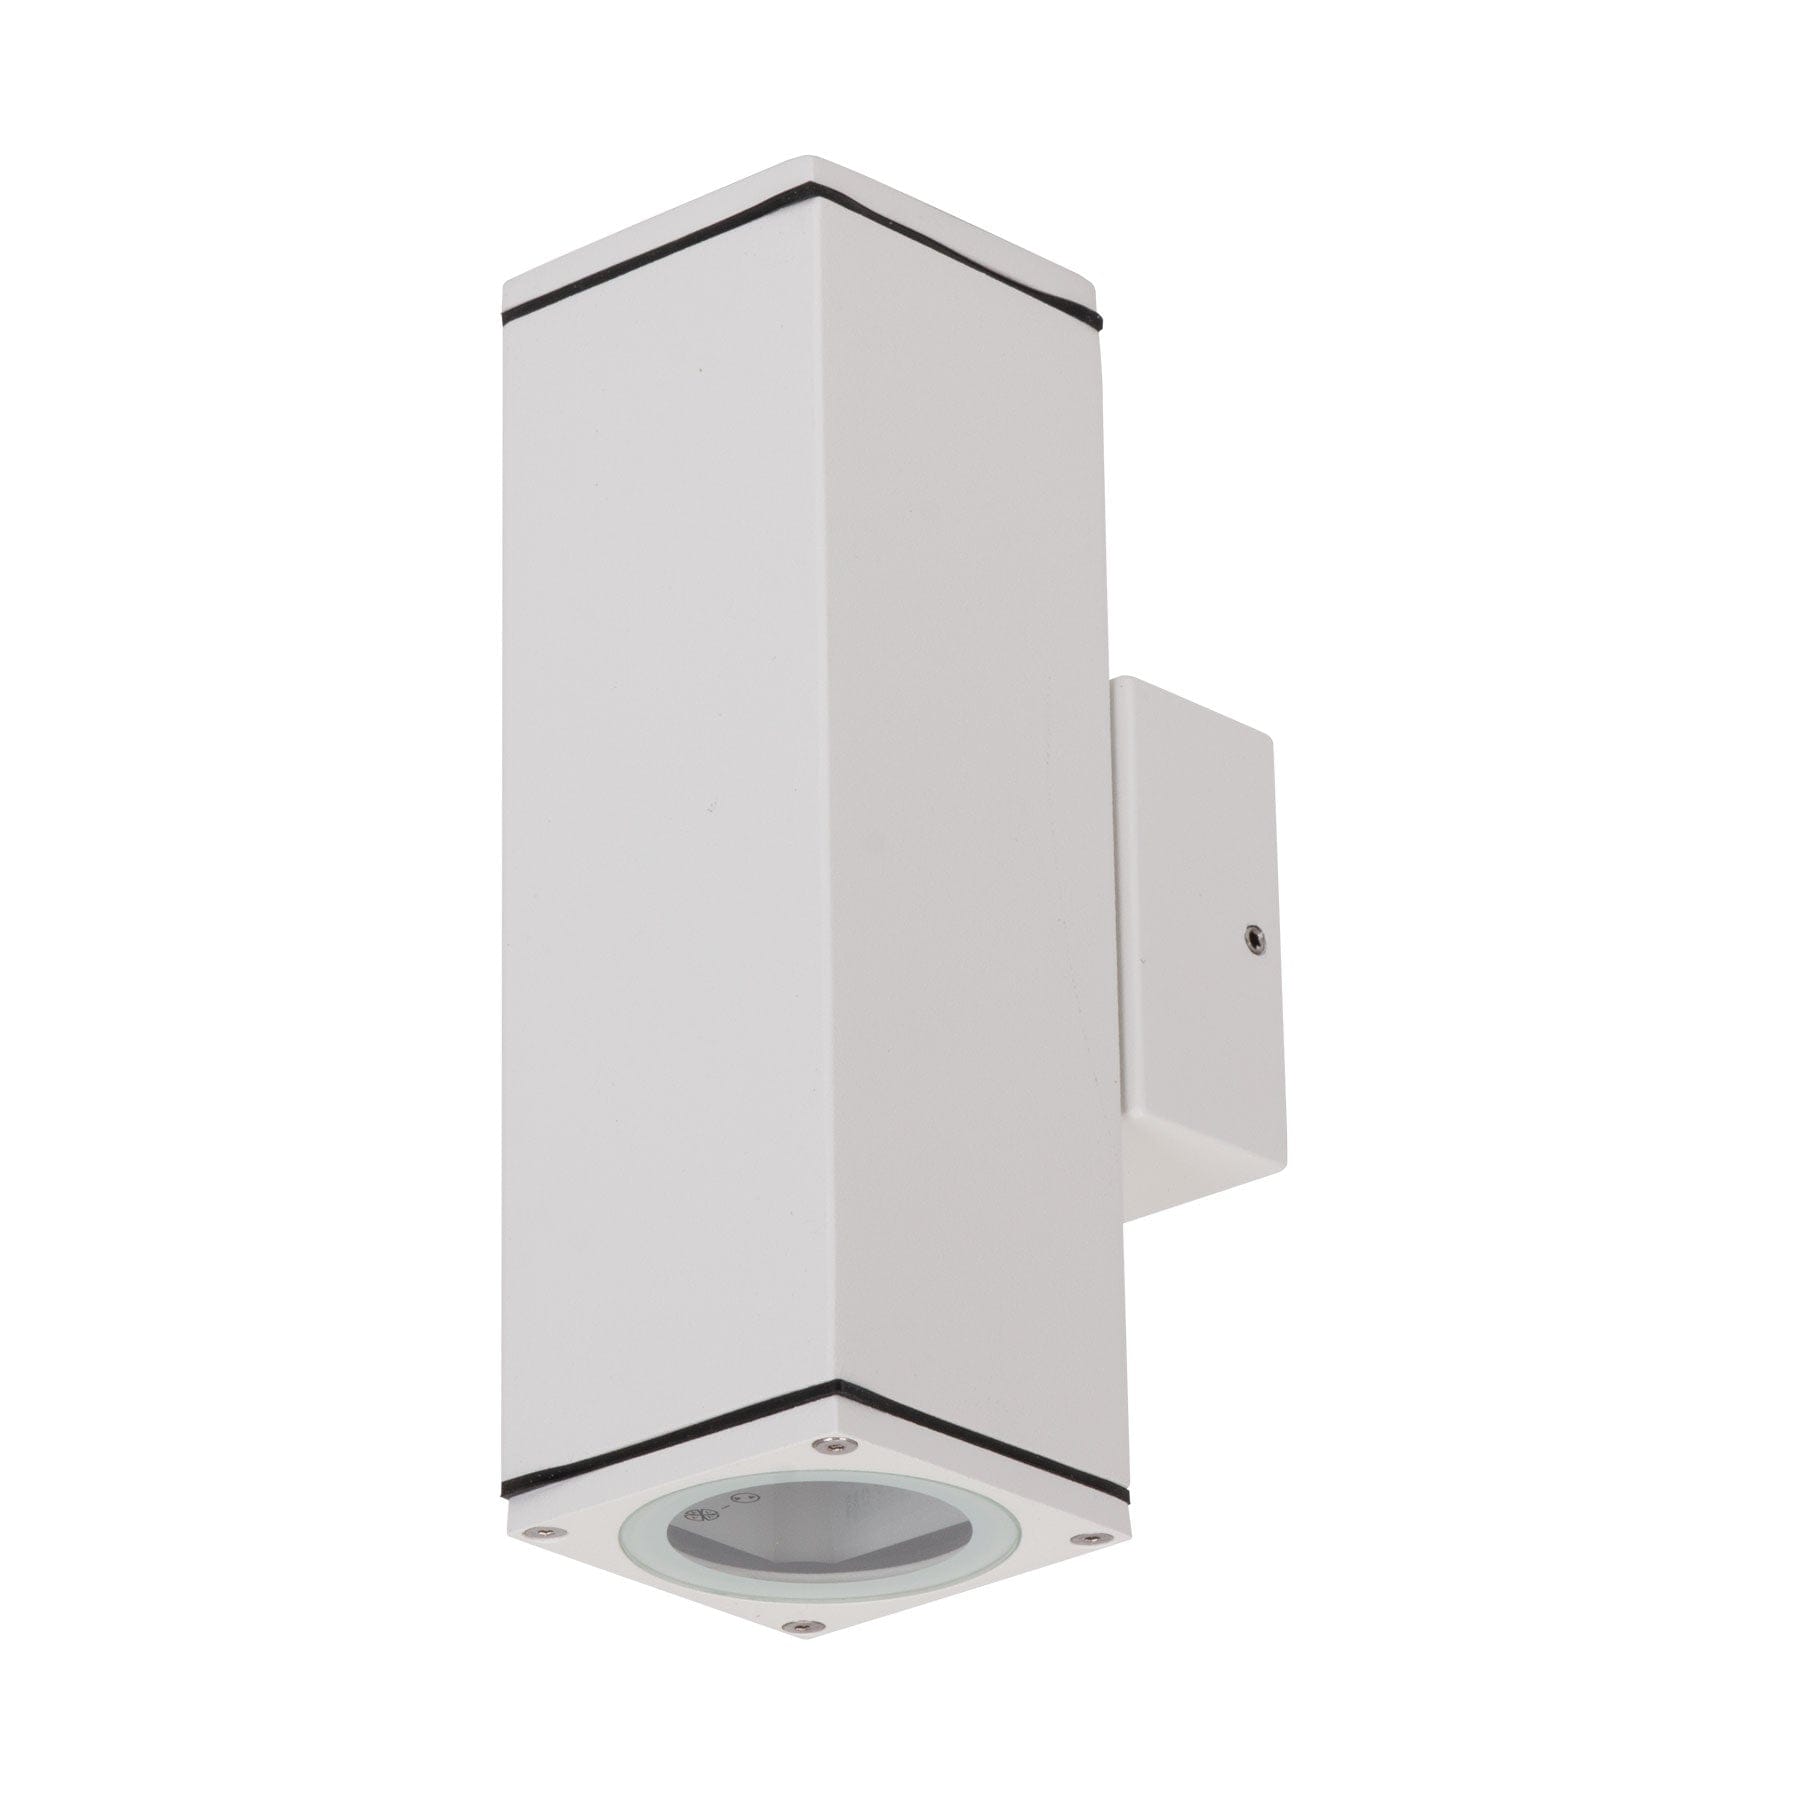 Domus Lighting Outdoor Wall Lights White / 3000K DOMUS ALPHA-2 EXTERIOR WALL LIGHT WITH OR WITHOUT LAMP Lights-For-You 19798